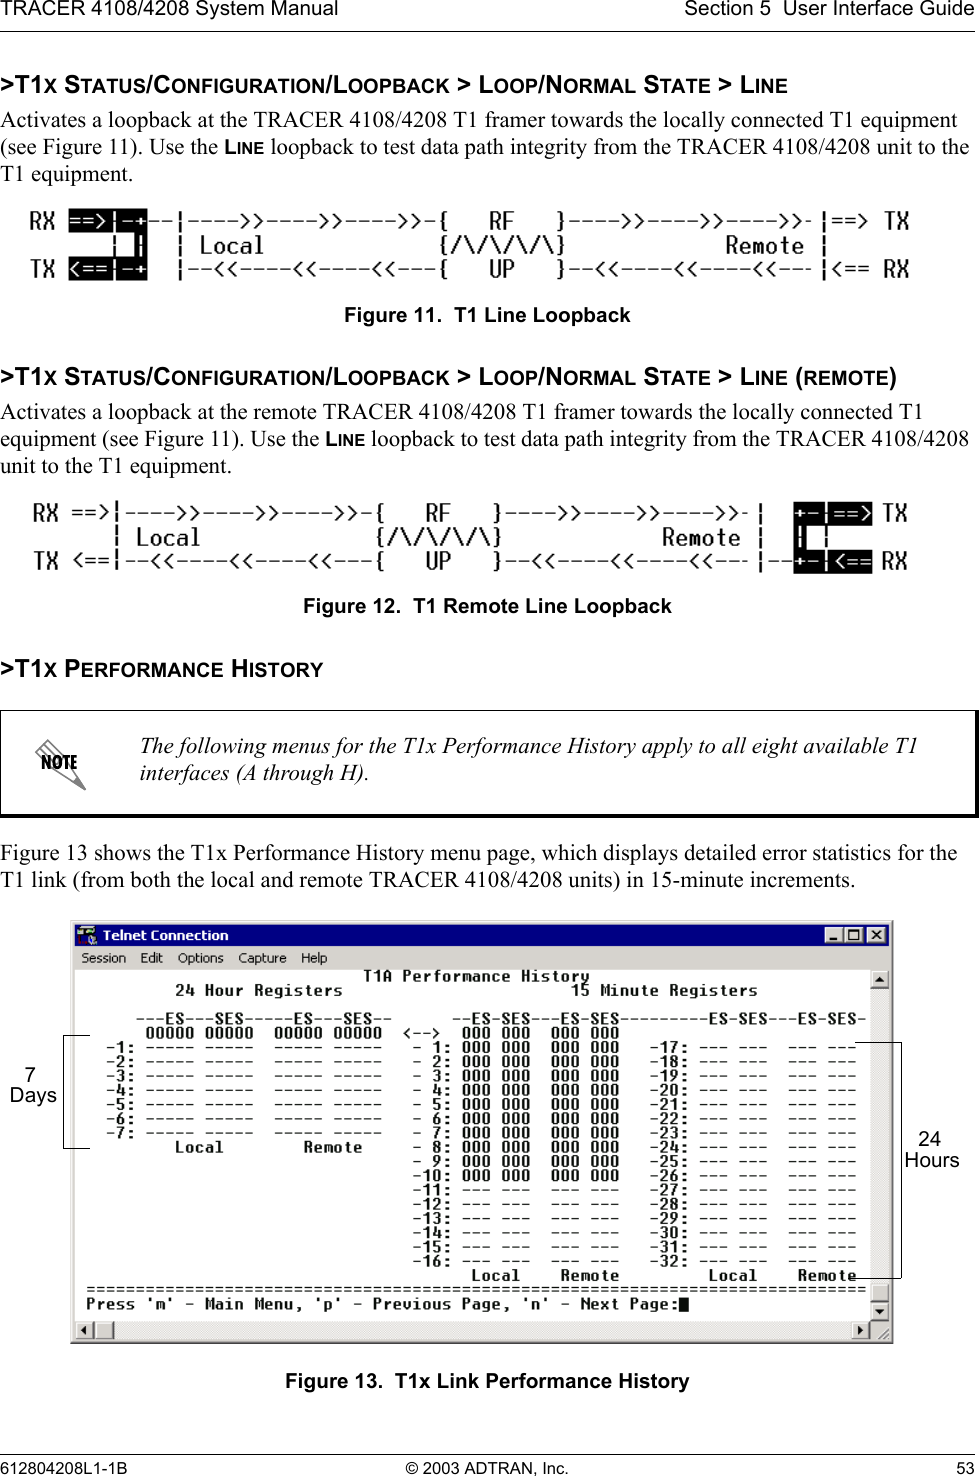 TRACER 4108/4208 System Manual Section 5  User Interface Guide612804208L1-1B © 2003 ADTRAN, Inc. 53&gt;T1X STATUS/CONFIGURATION/LOOPBACK &gt; LOOP/NORMAL STATE &gt; LINEActivates a loopback at the TRACER 4108/4208 T1 framer towards the locally connected T1 equipment (see Figure 11). Use the LINE loopback to test data path integrity from the TRACER 4108/4208 unit to the T1 equipment.Figure 11.  T1 Line Loopback&gt;T1X STATUS/CONFIGURATION/LOOPBACK &gt; LOOP/NORMAL STATE &gt; LINE (REMOTE)Activates a loopback at the remote TRACER 4108/4208 T1 framer towards the locally connected T1 equipment (see Figure 11). Use the LINE loopback to test data path integrity from the TRACER 4108/4208 unit to the T1 equipment.Figure 12.  T1 Remote Line Loopback&gt;T1X PERFORMANCE HISTORYFigure 13 shows the T1x Performance History menu page, which displays detailed error statistics for the T1 link (from both the local and remote TRACER 4108/4208 units) in 15-minute increments. Figure 13.  T1x Link Performance HistoryThe following menus for the T1x Performance History apply to all eight available T1 interfaces (A through H).24 Hours7 Days